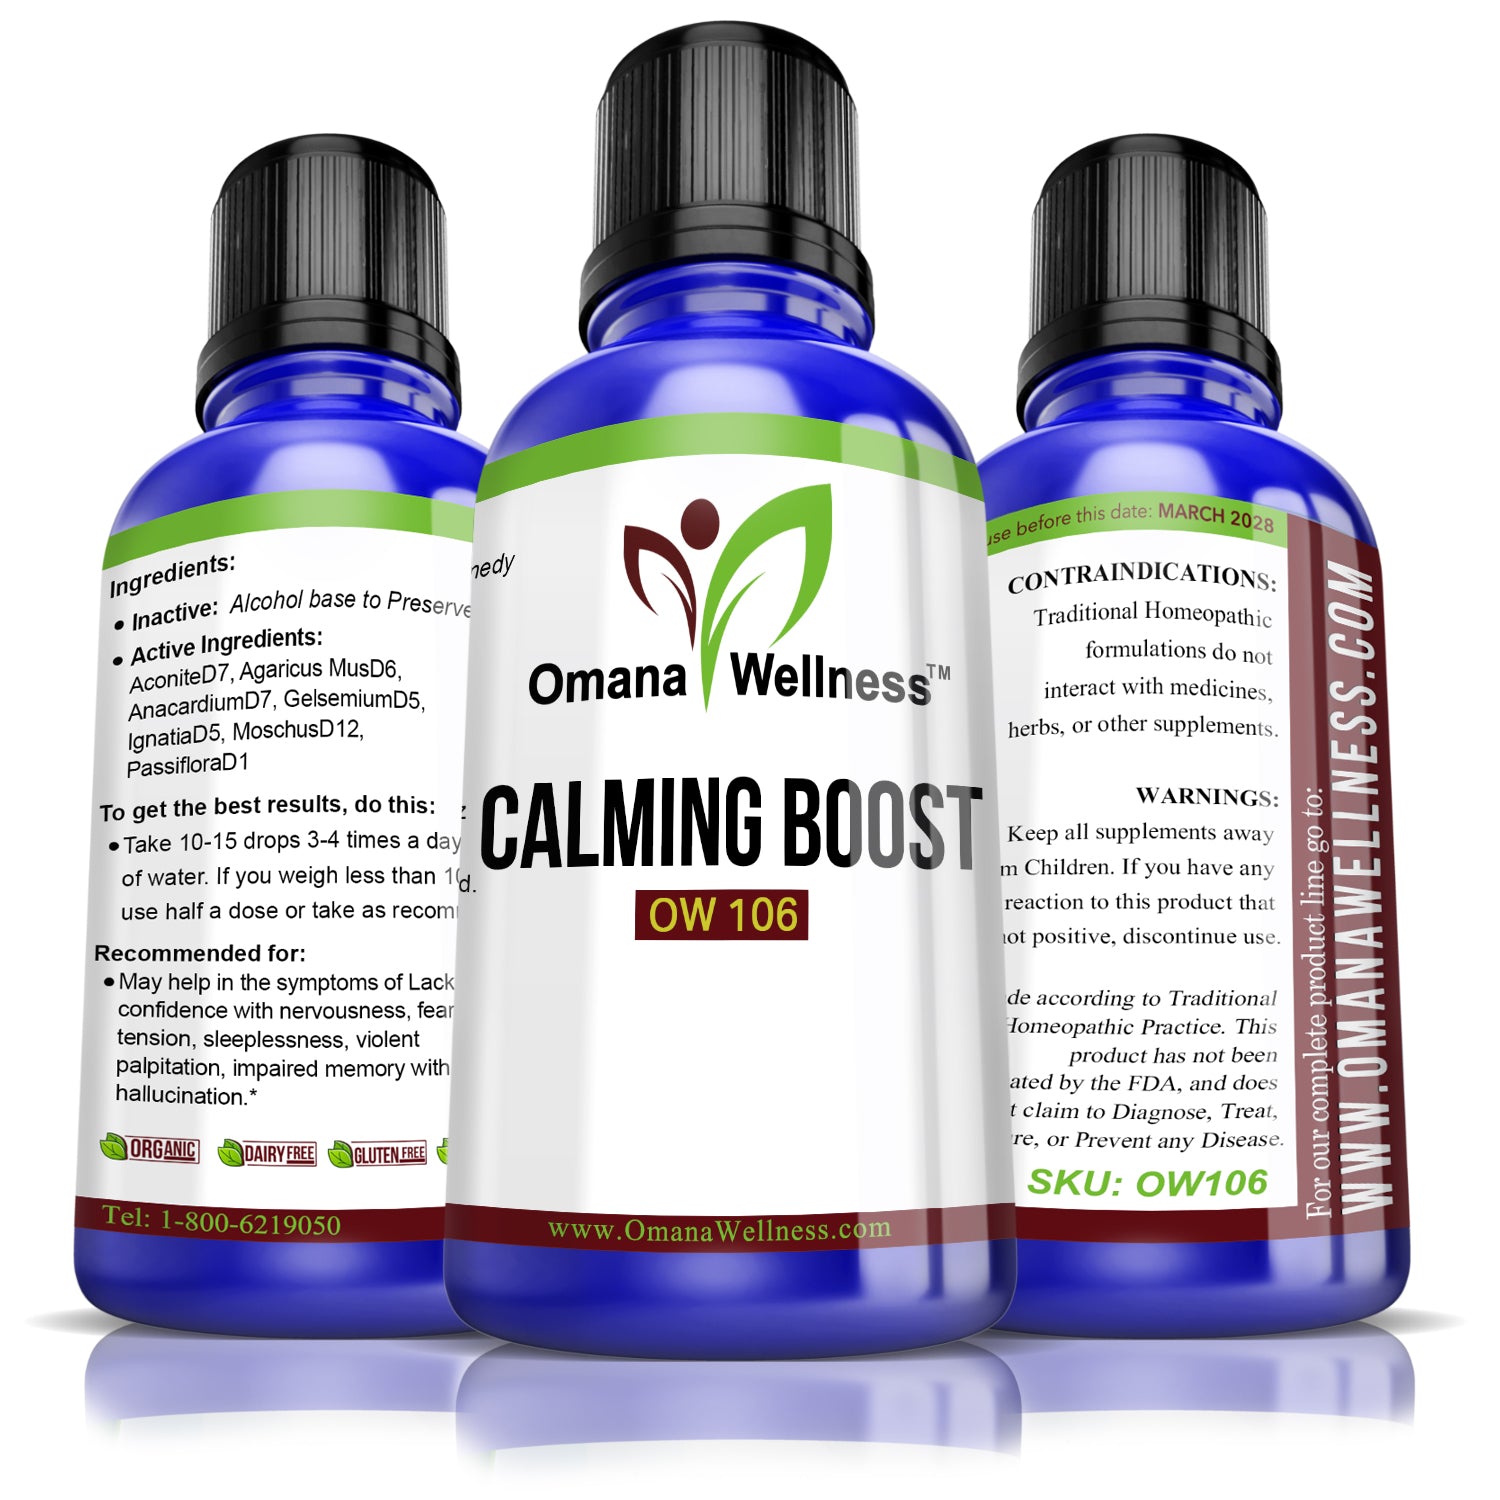 CALMING BOOST OW106